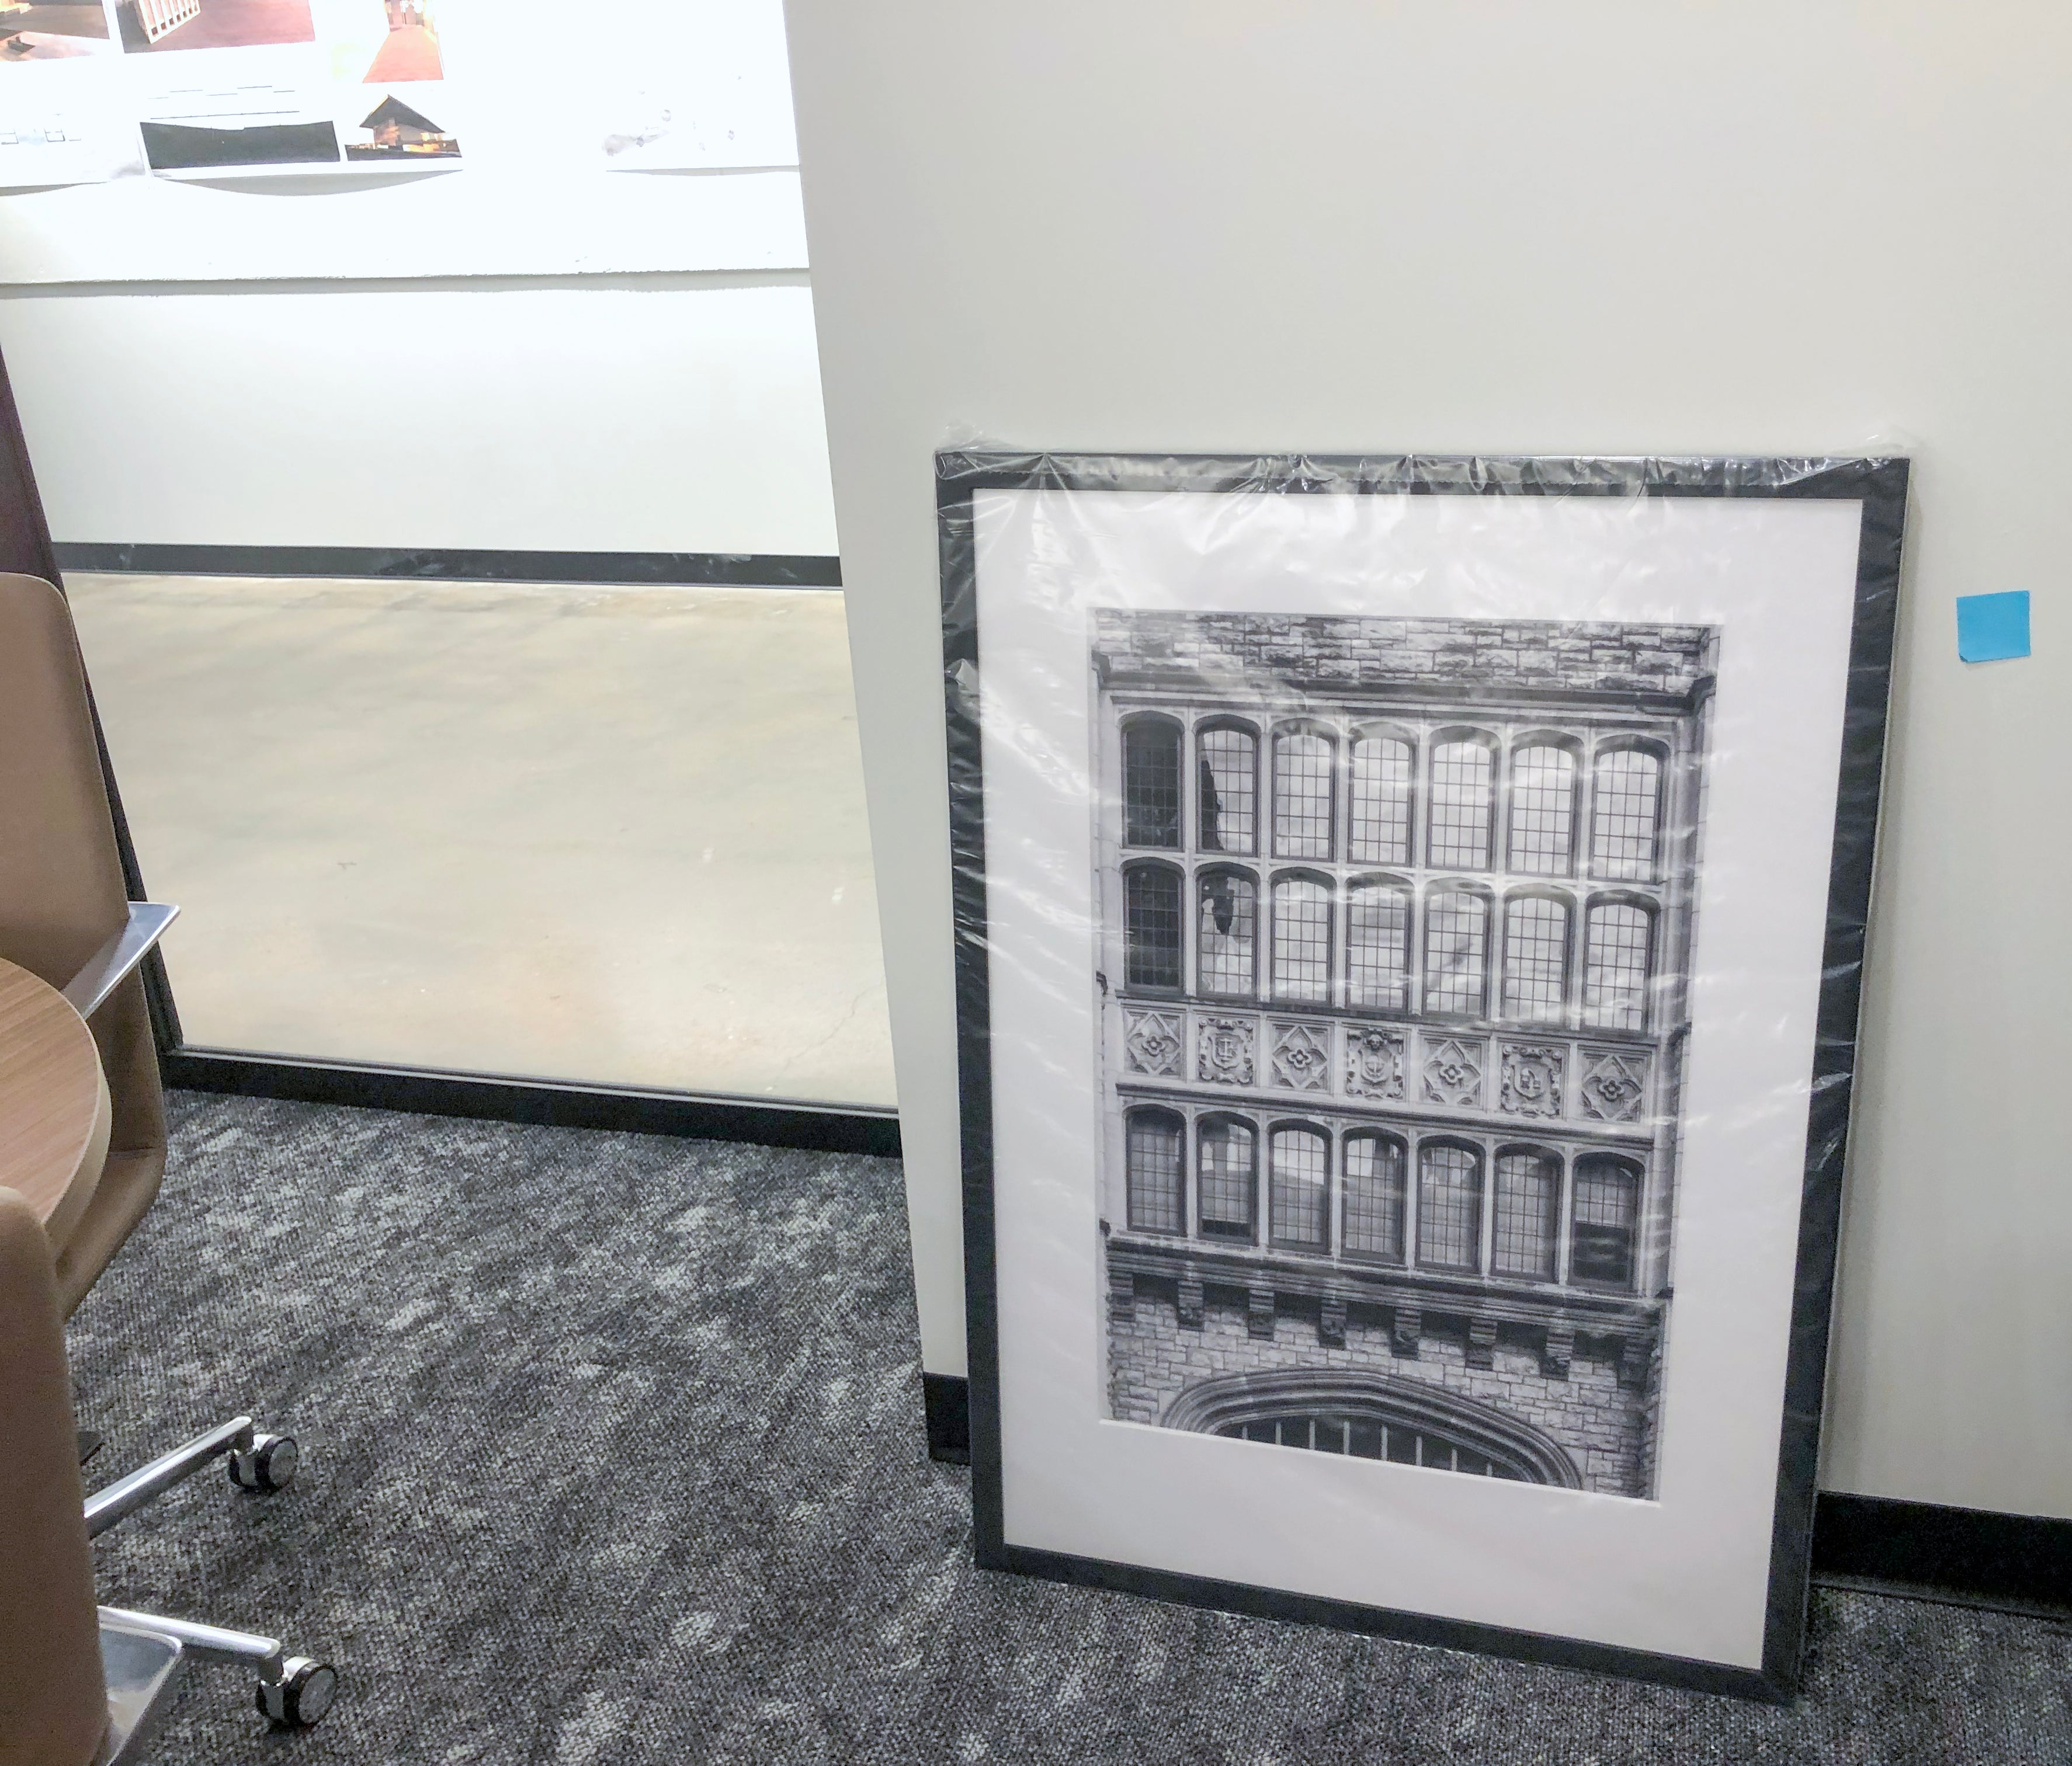 Keith Dotson's 20 x 30 inch print of the facade of Nashville's historic Hume-Fogg Academy in a black gallery frame with 8-ply white mat, waiting to be hung on the wall at O'More College of Architecture and Design at Belmont University